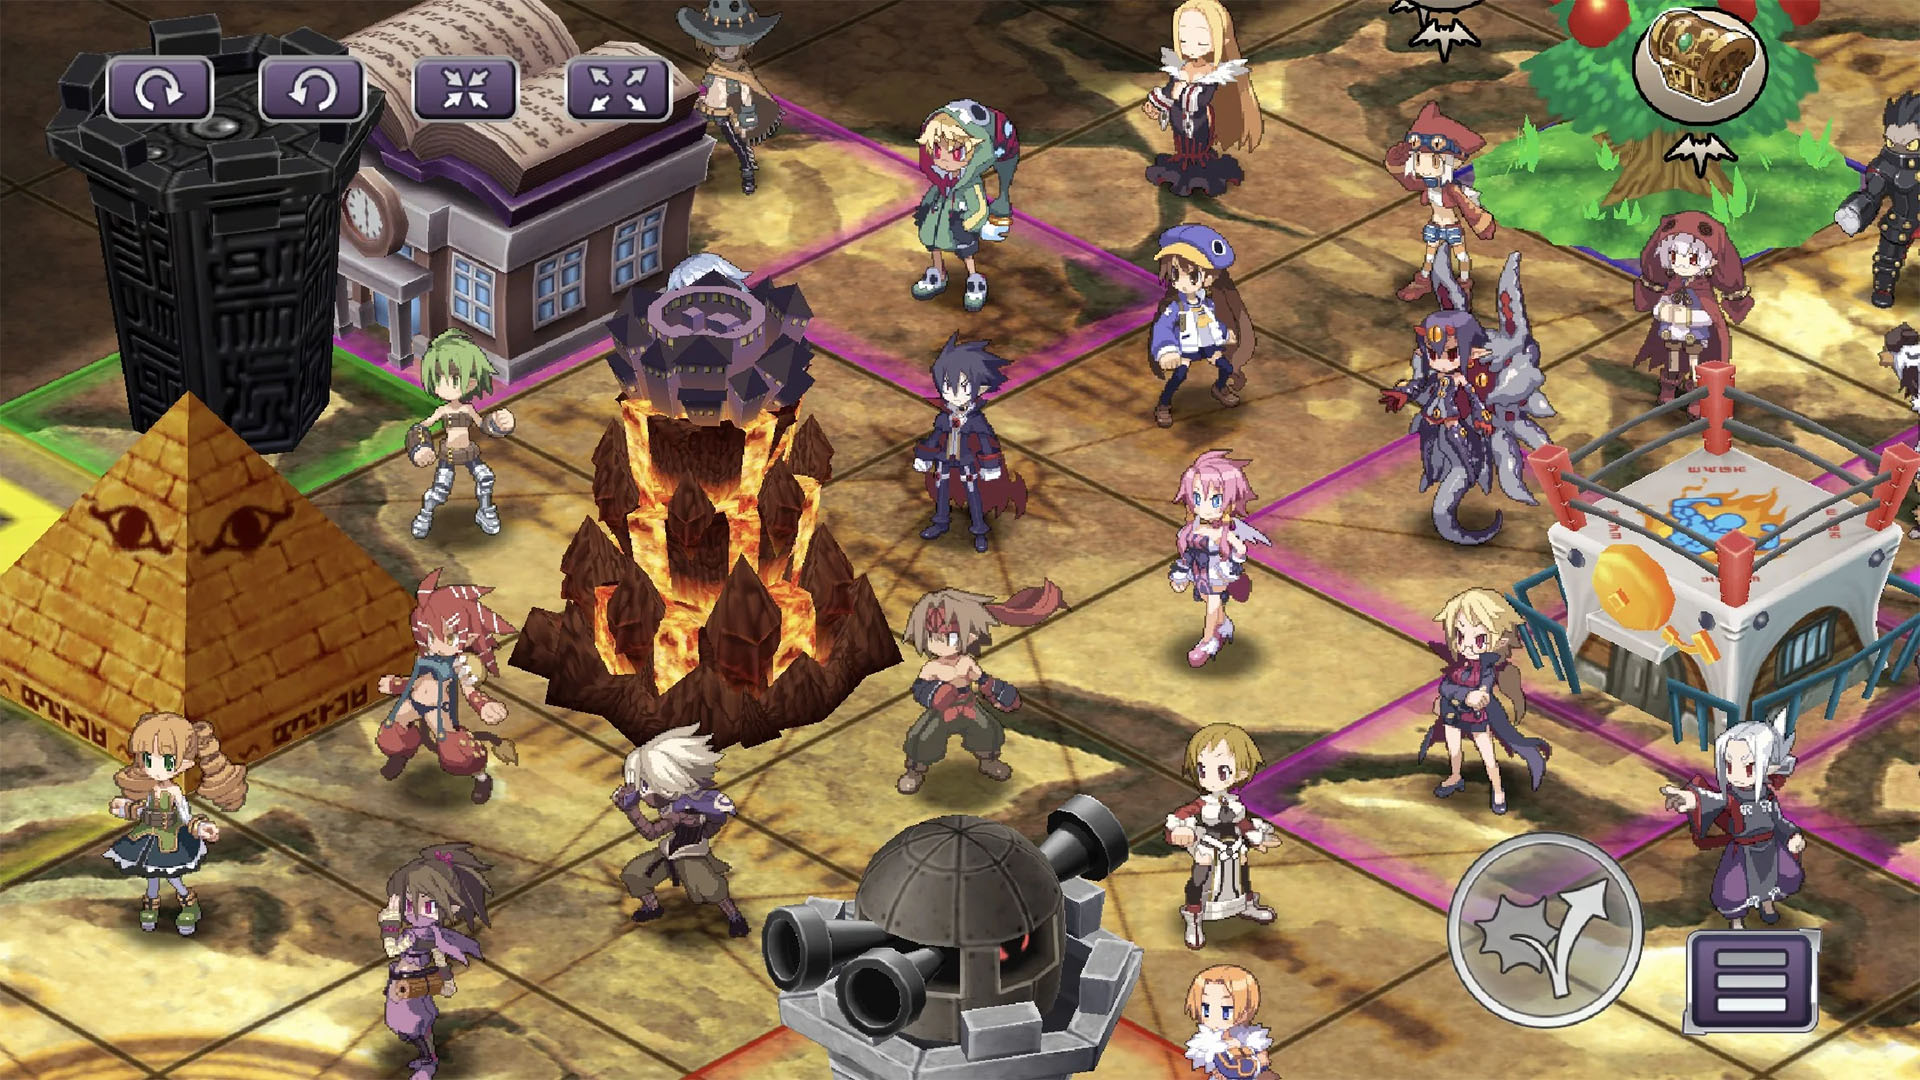 Disgaea 4: A Promise Revisited gets a surprise mobile port